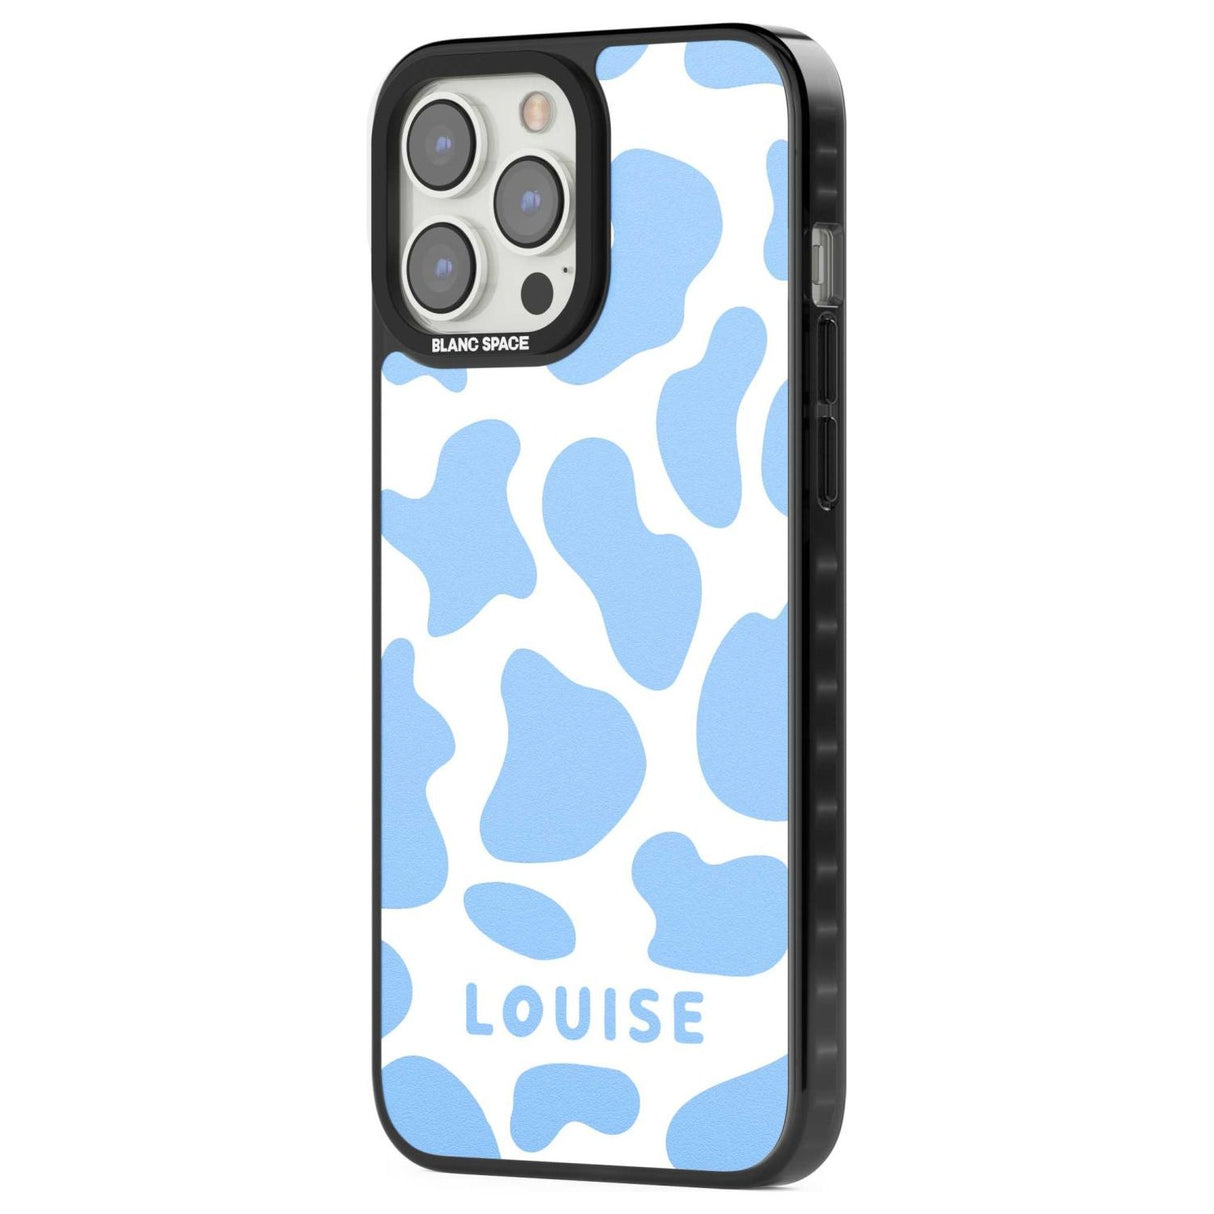 Personalised Blue and White Cow Print Custom Phone Case iPhone 15 Pro Max / Black Impact Case,iPhone 15 Plus / Black Impact Case,iPhone 15 Pro / Black Impact Case,iPhone 15 / Black Impact Case,iPhone 15 Pro Max / Impact Case,iPhone 15 Plus / Impact Case,iPhone 15 Pro / Impact Case,iPhone 15 / Impact Case,iPhone 15 Pro Max / Magsafe Black Impact Case,iPhone 15 Plus / Magsafe Black Impact Case,iPhone 15 Pro / Magsafe Black Impact Case,iPhone 15 / Magsafe Black Impact Case,iPhone 14 Pro Max / Black Impact Case